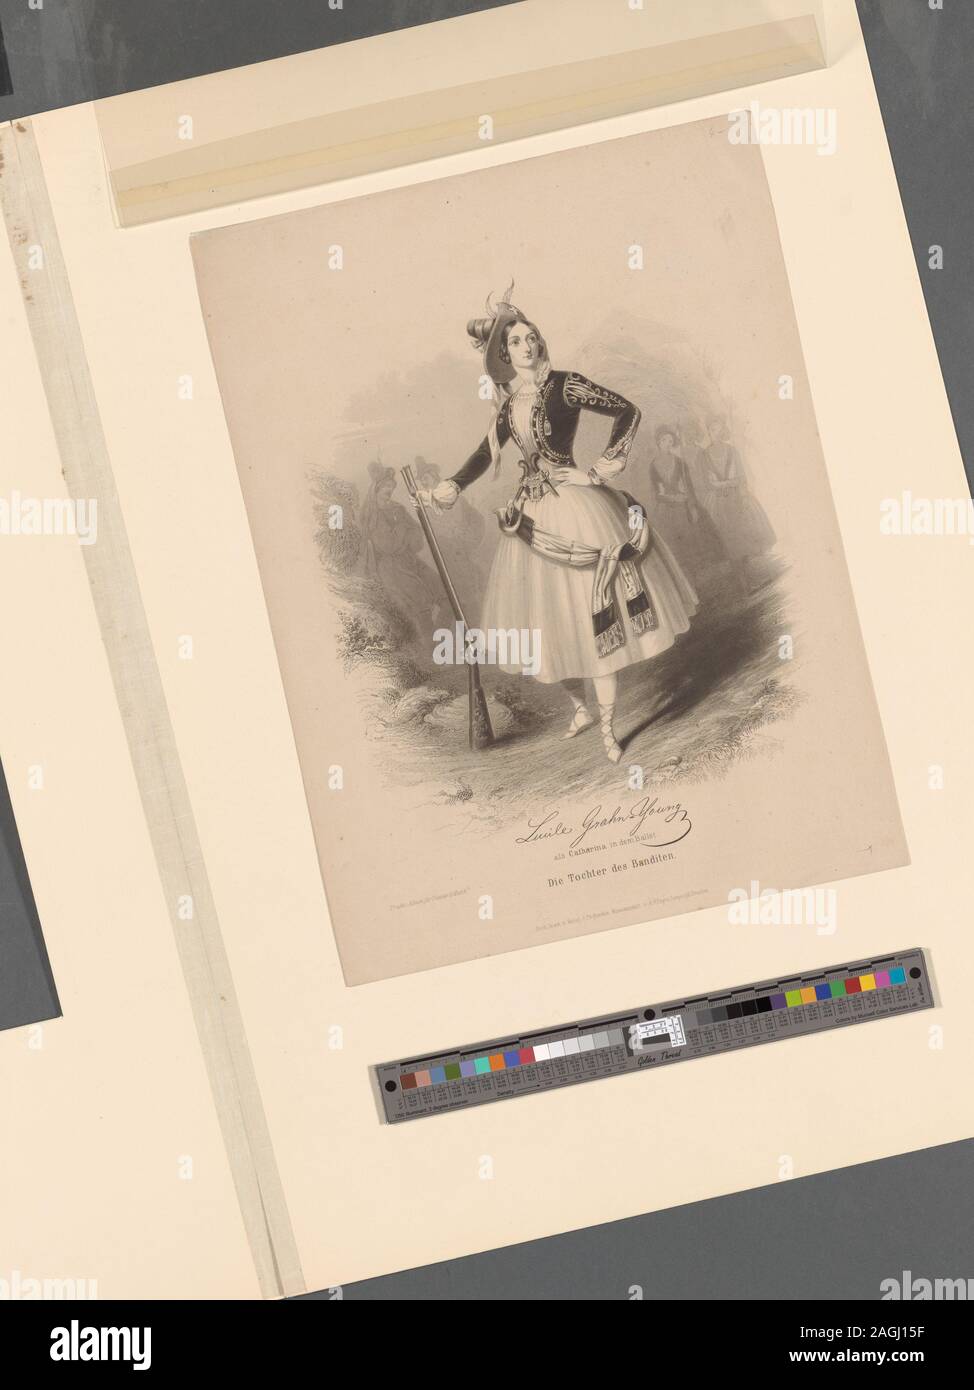 After a lithograph by John Brandard. Grahn in Perrot's ballet Catarina; ou La fille du bandit. To right, looking right, left hand at waist, right hand holding musket. Outdoor setting.; Lucile Grahn-Young [facsimile signature] als Catharina in dem Ballet Die Tochter des Banditen. Stock Photo